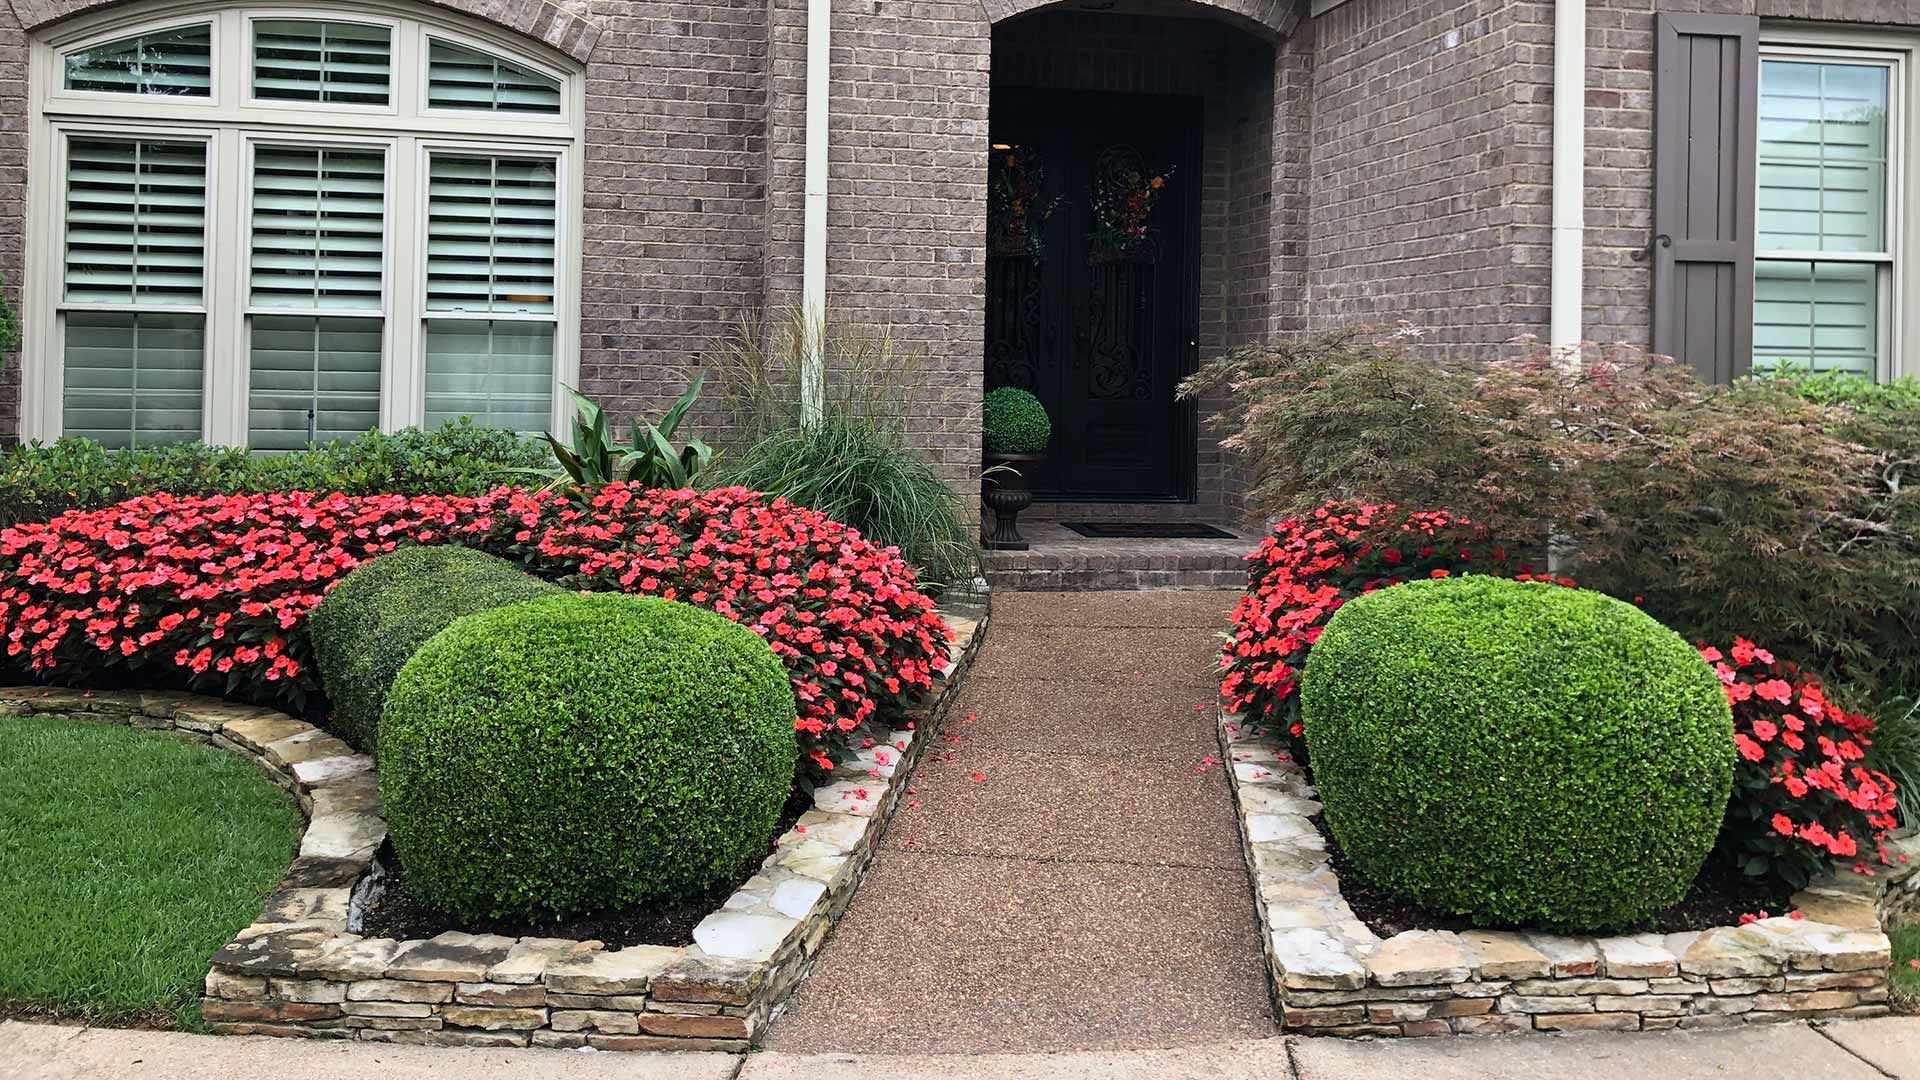 Lush landscape bed with bright flowers and trimmed bushes in Germantown, TN.